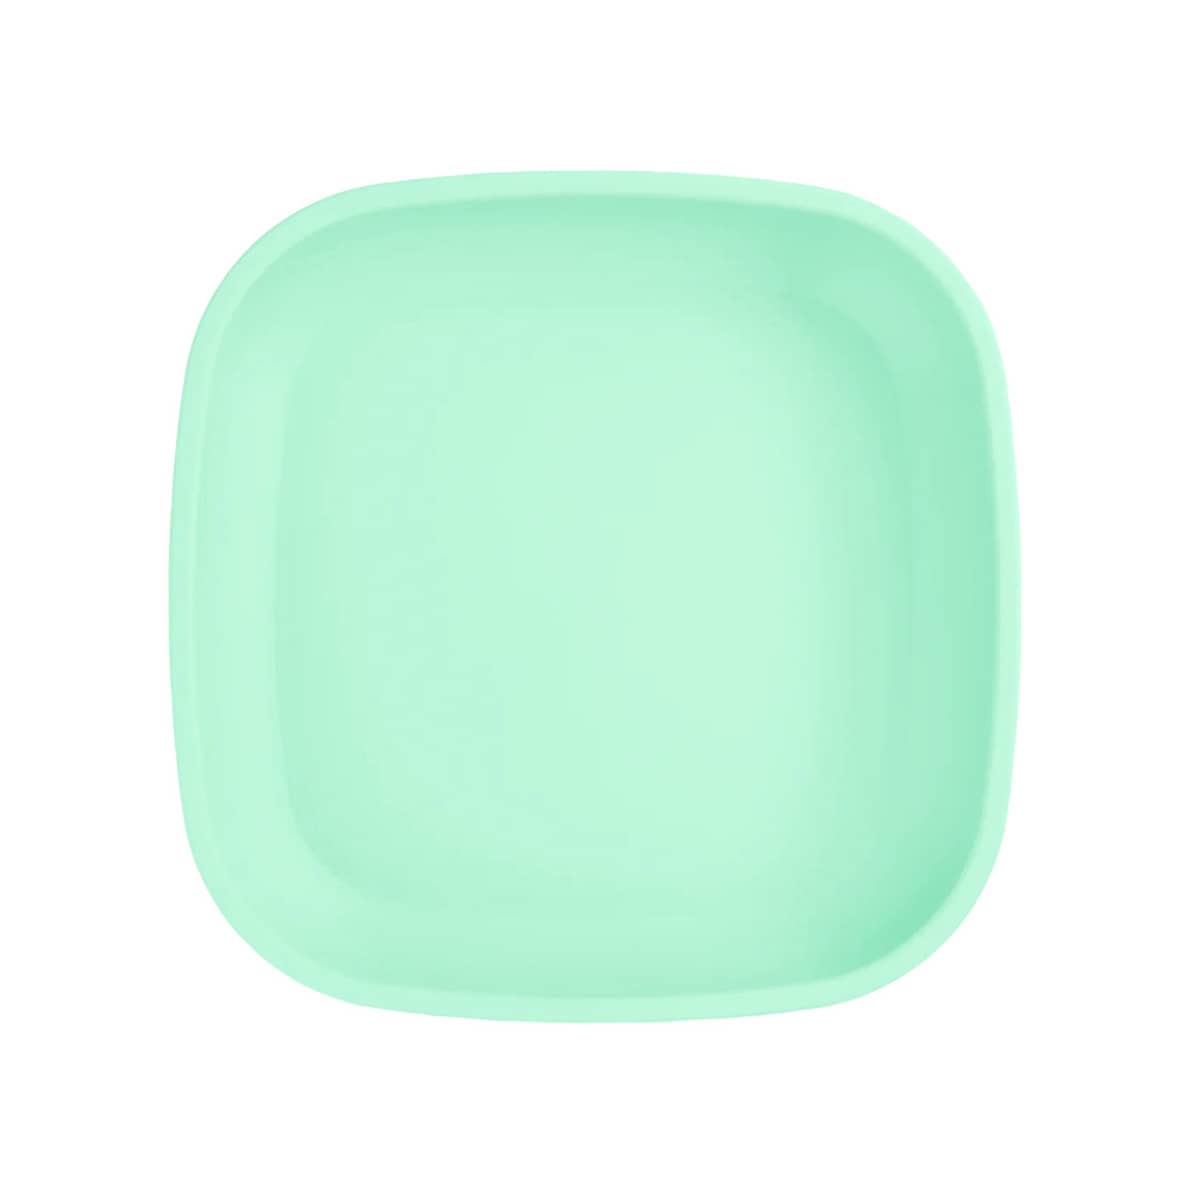 Re-Play Recycled Flat Plate - Mint